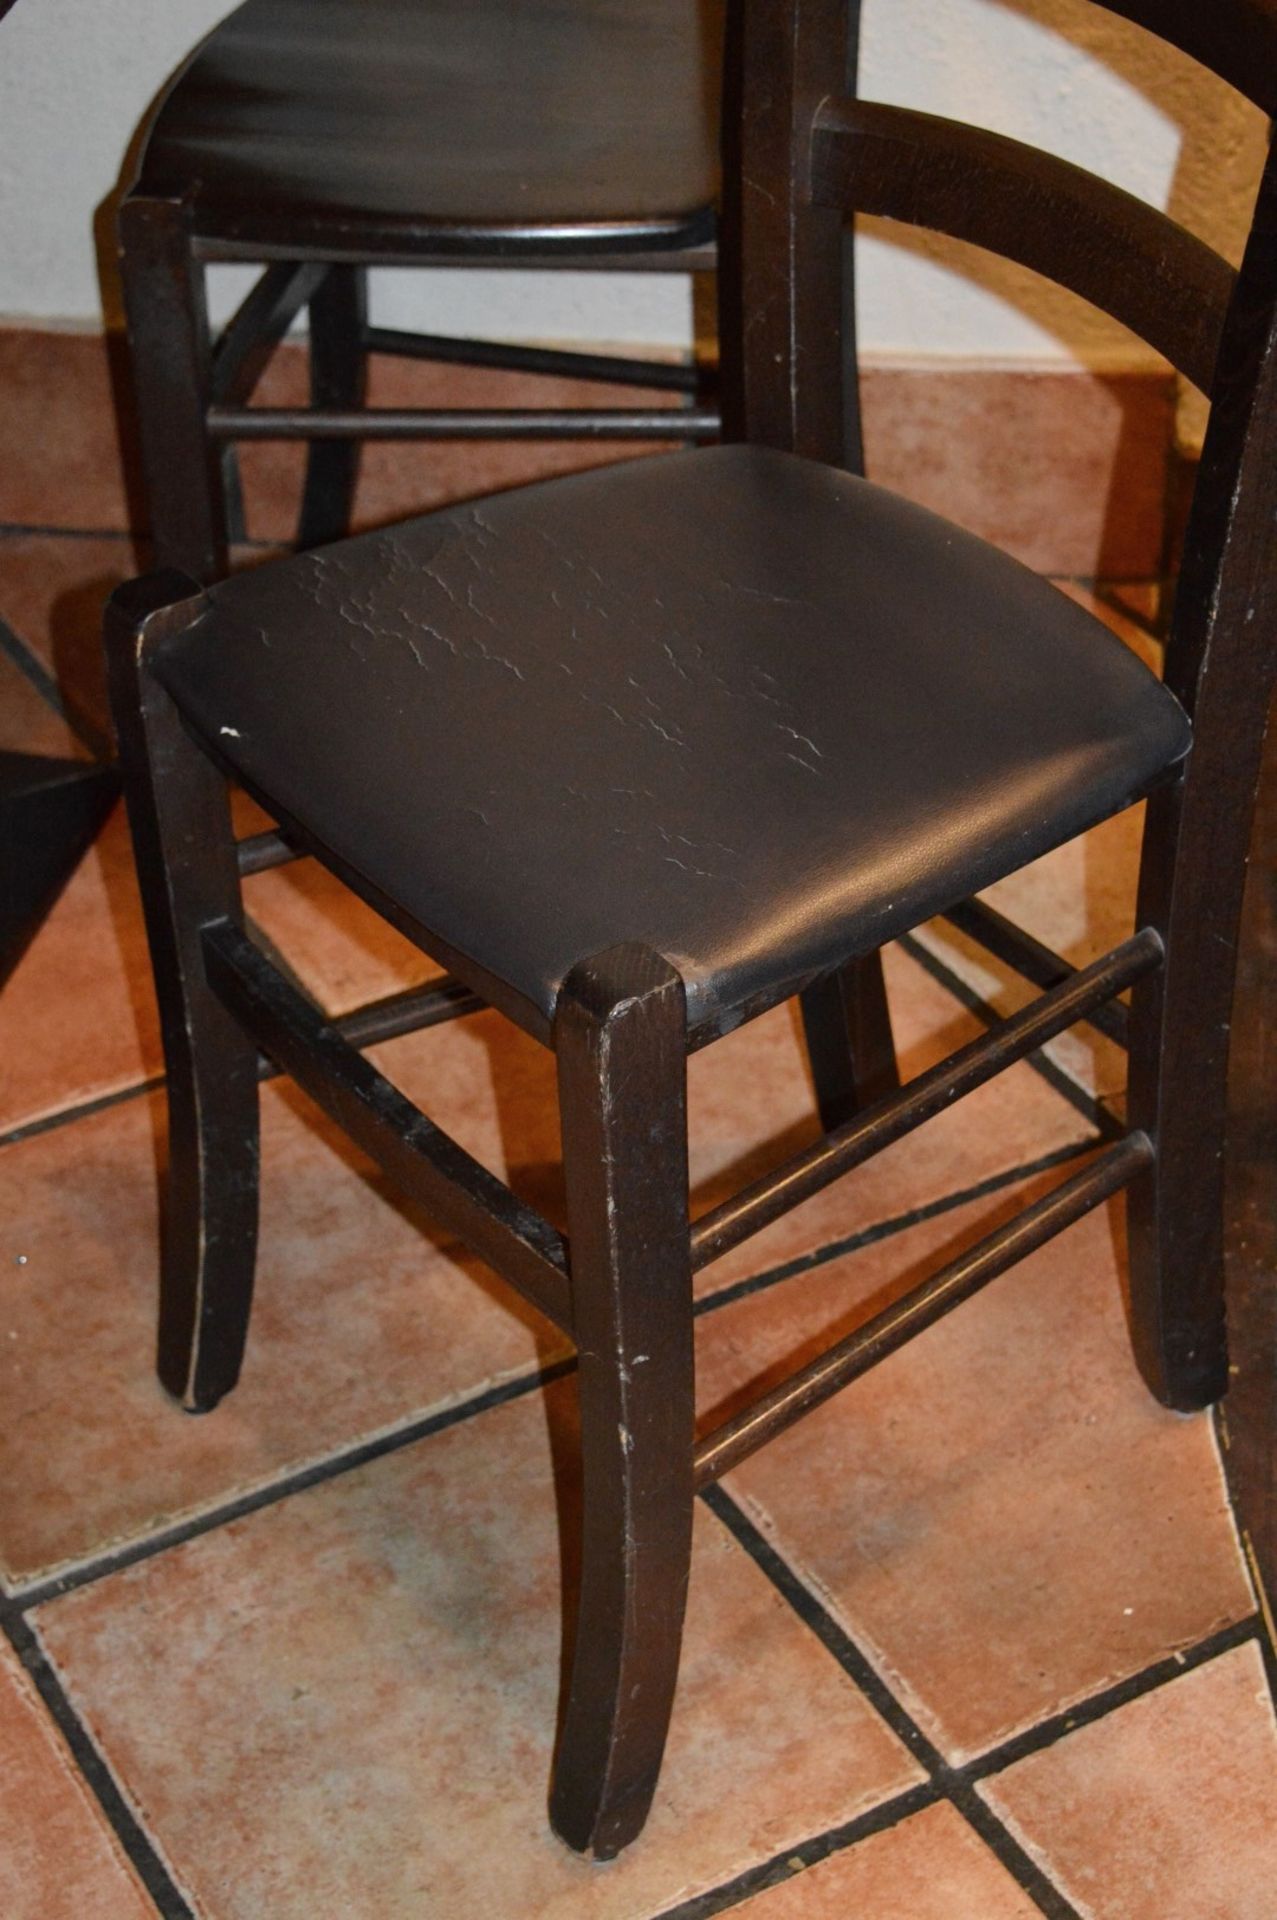 10 x Assorted Rustic Restaurant Dining Chairs - Taken From A Popular Eatery - Manchester M17 - Image 3 of 6